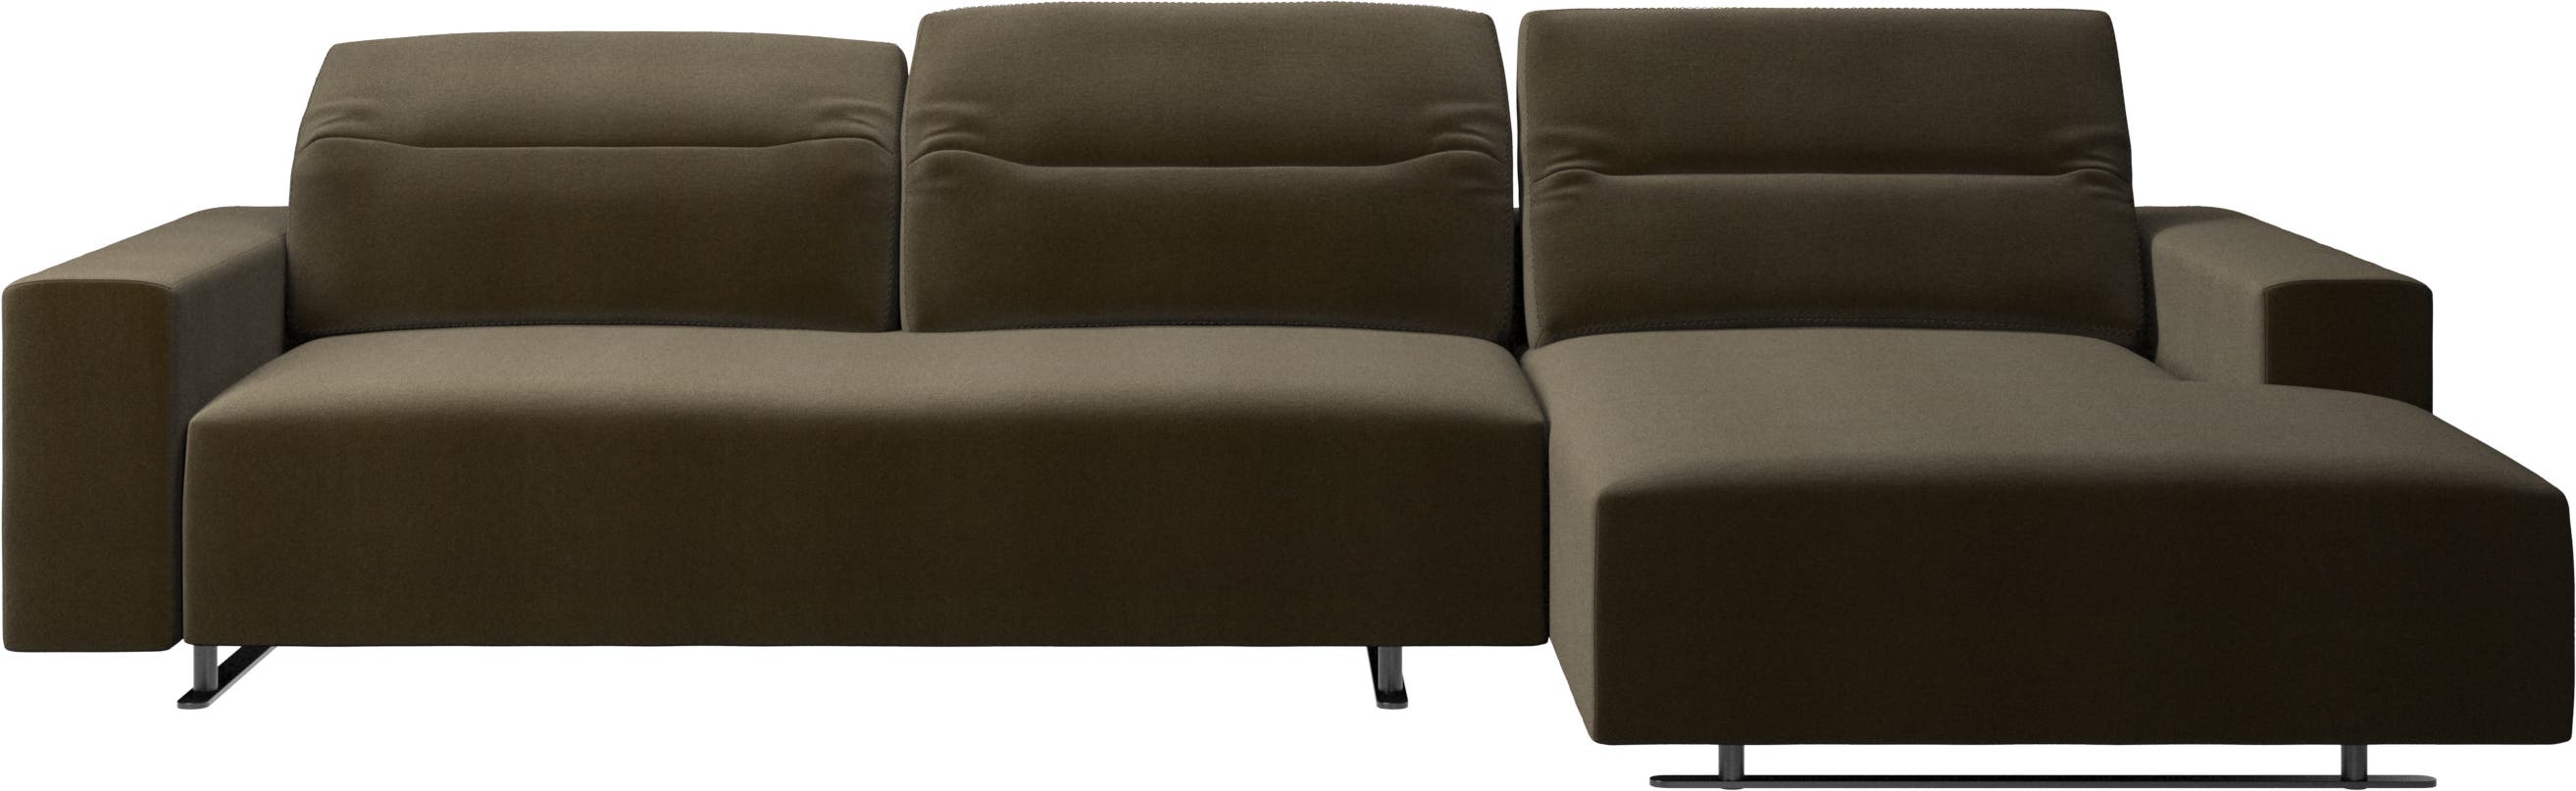 Hampton sofa with adjustable back, resting unit and storage right side